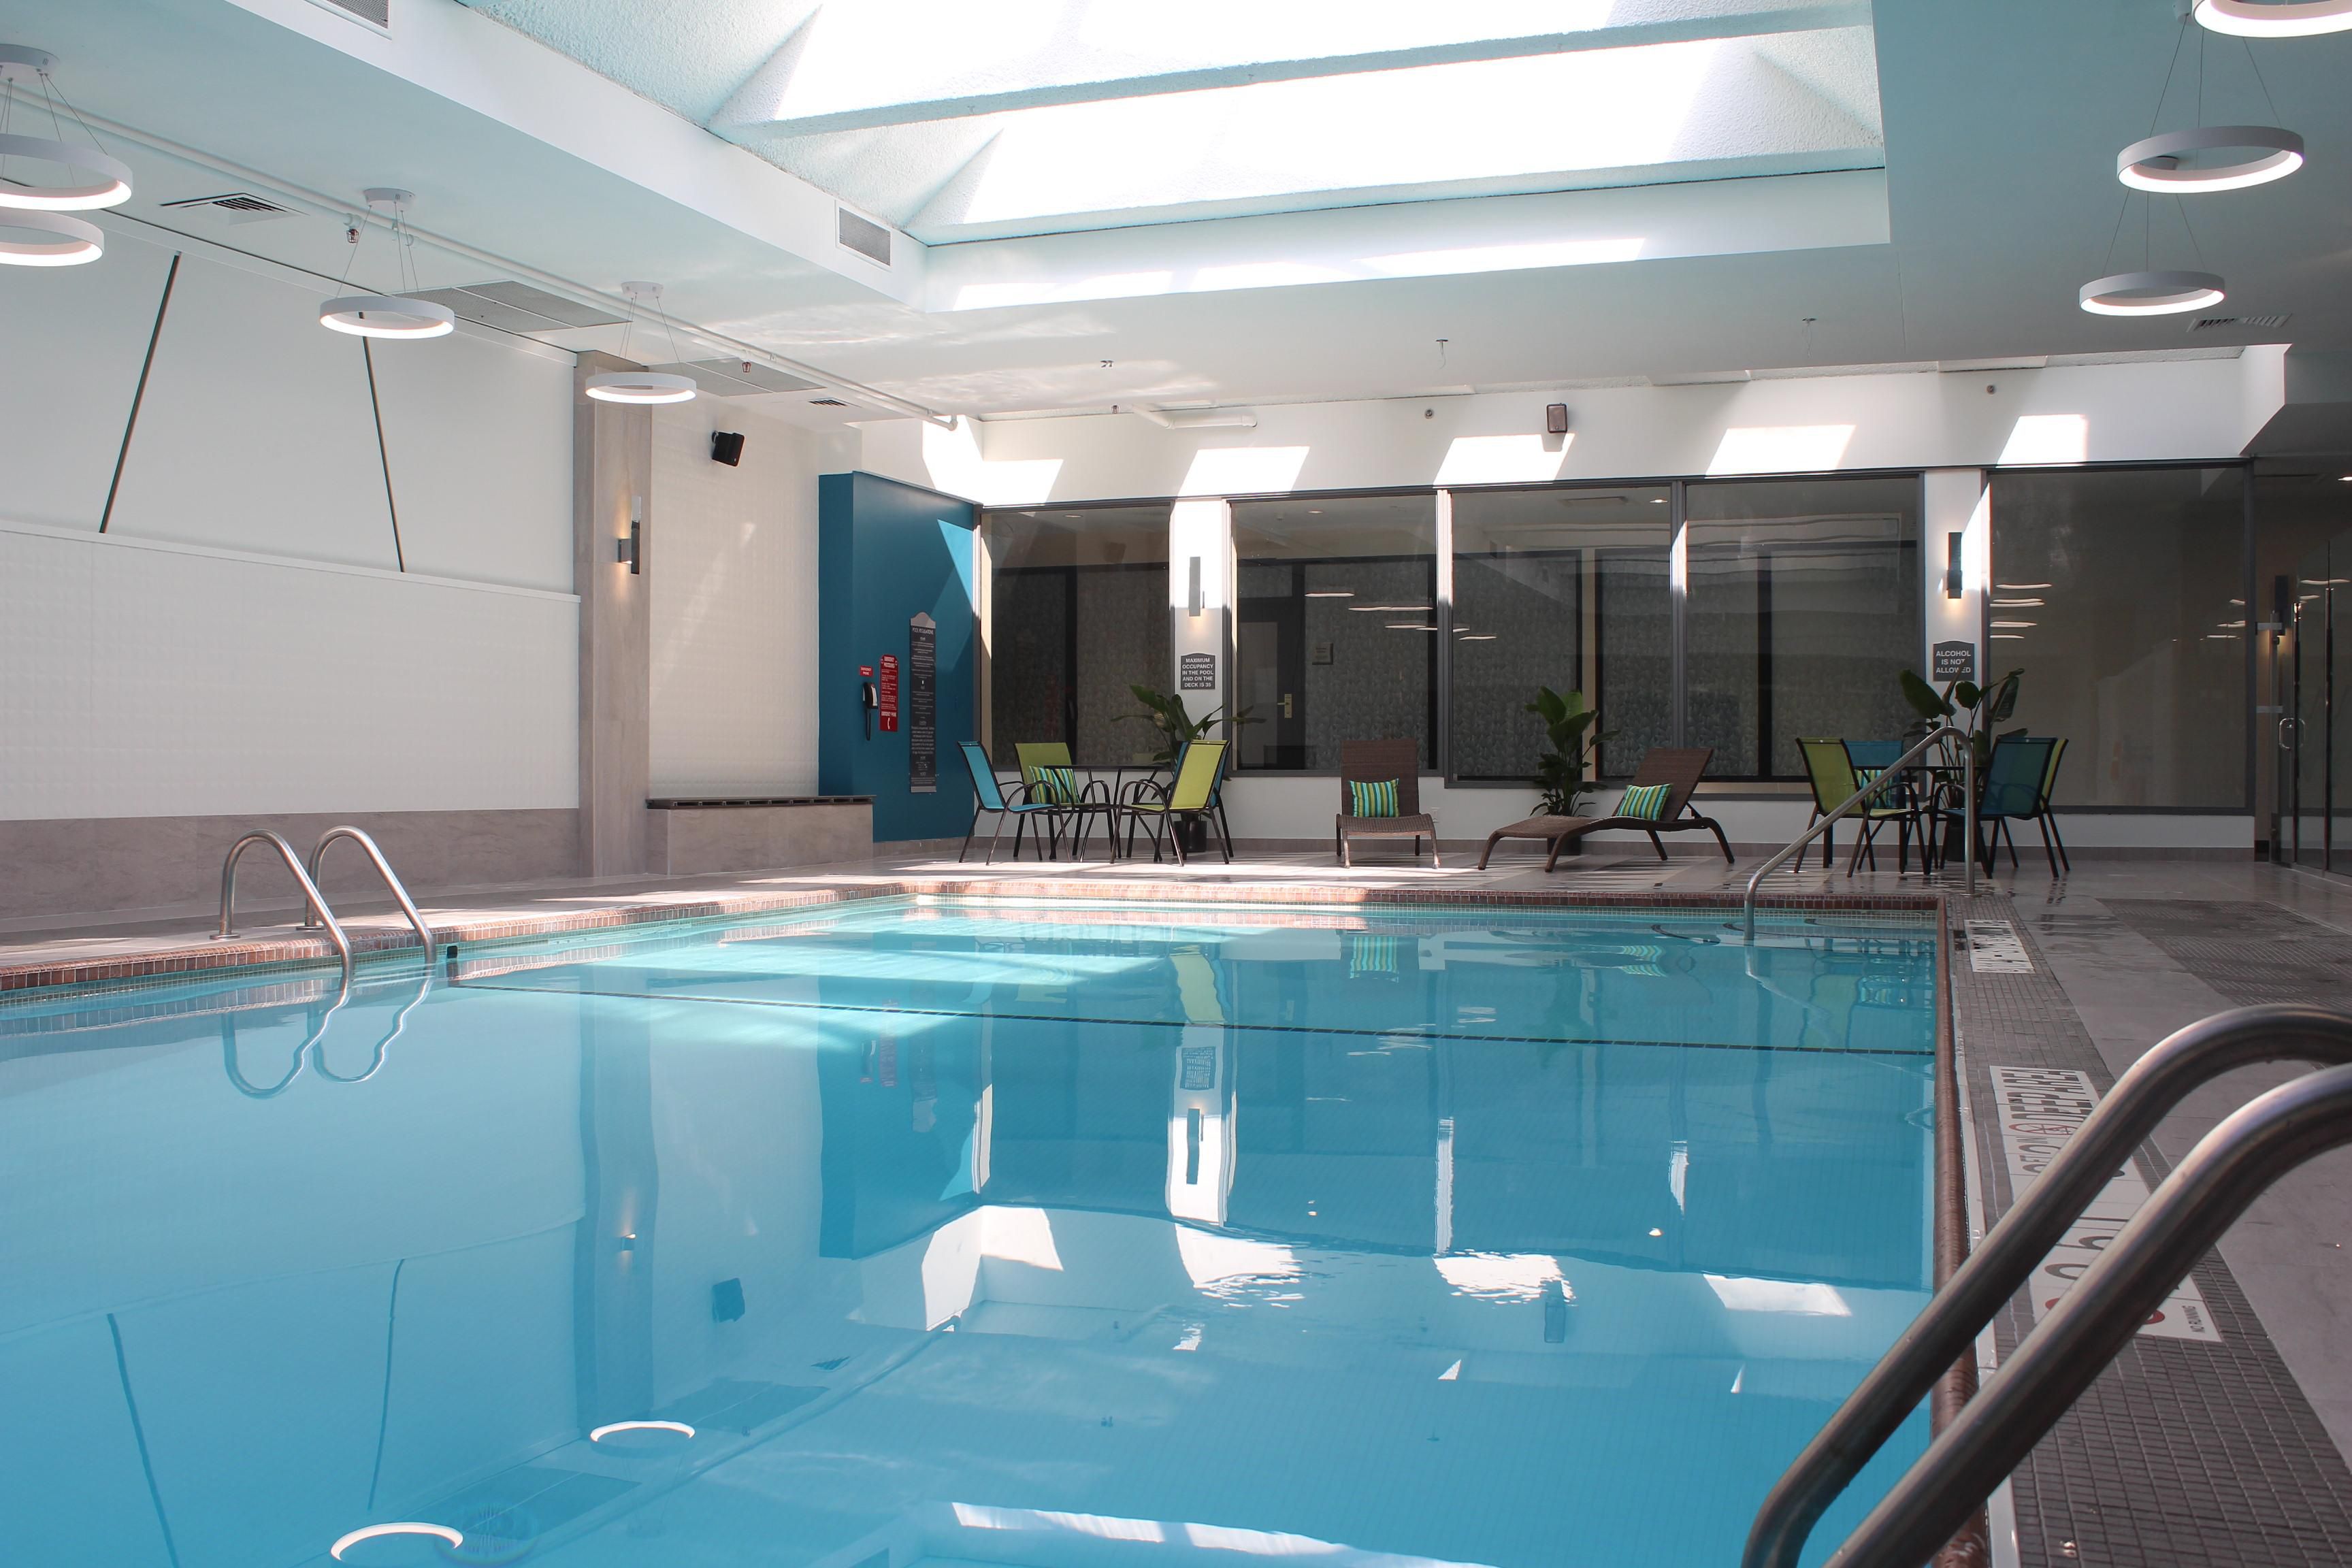 Take a dip in our indoor swimming pool